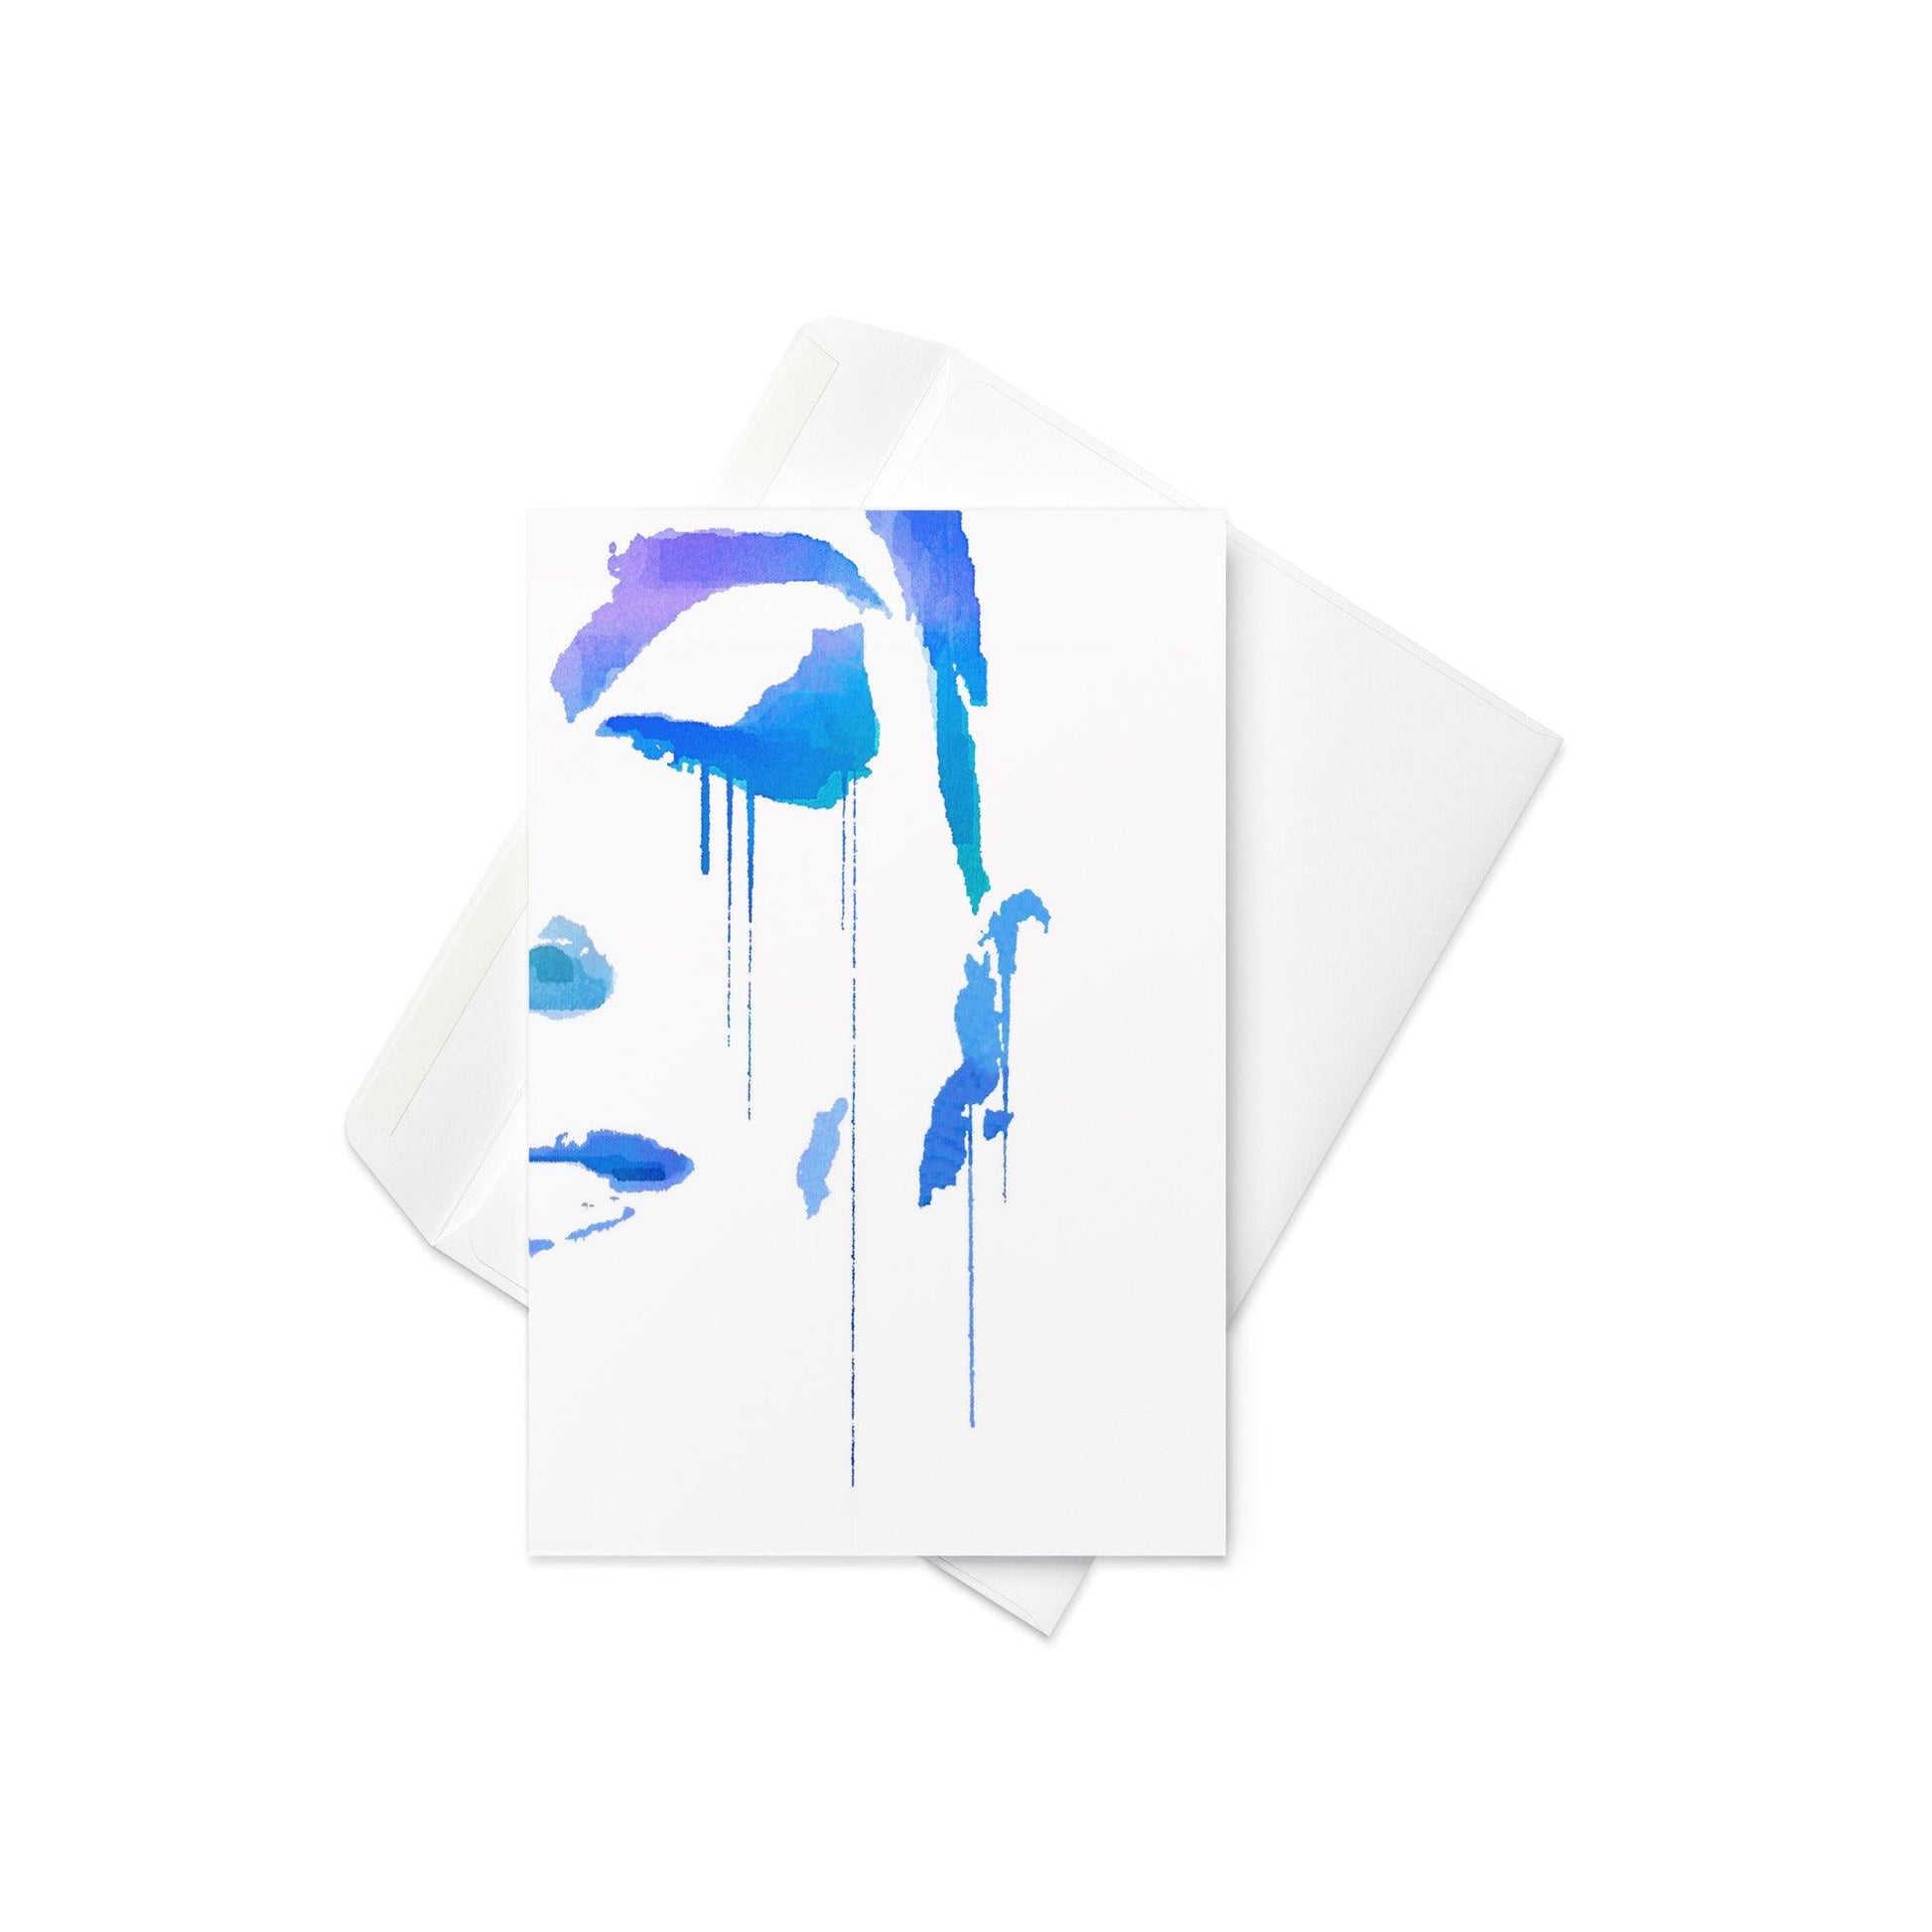 Tracks Of My Tears - Note Card - iSAW Company